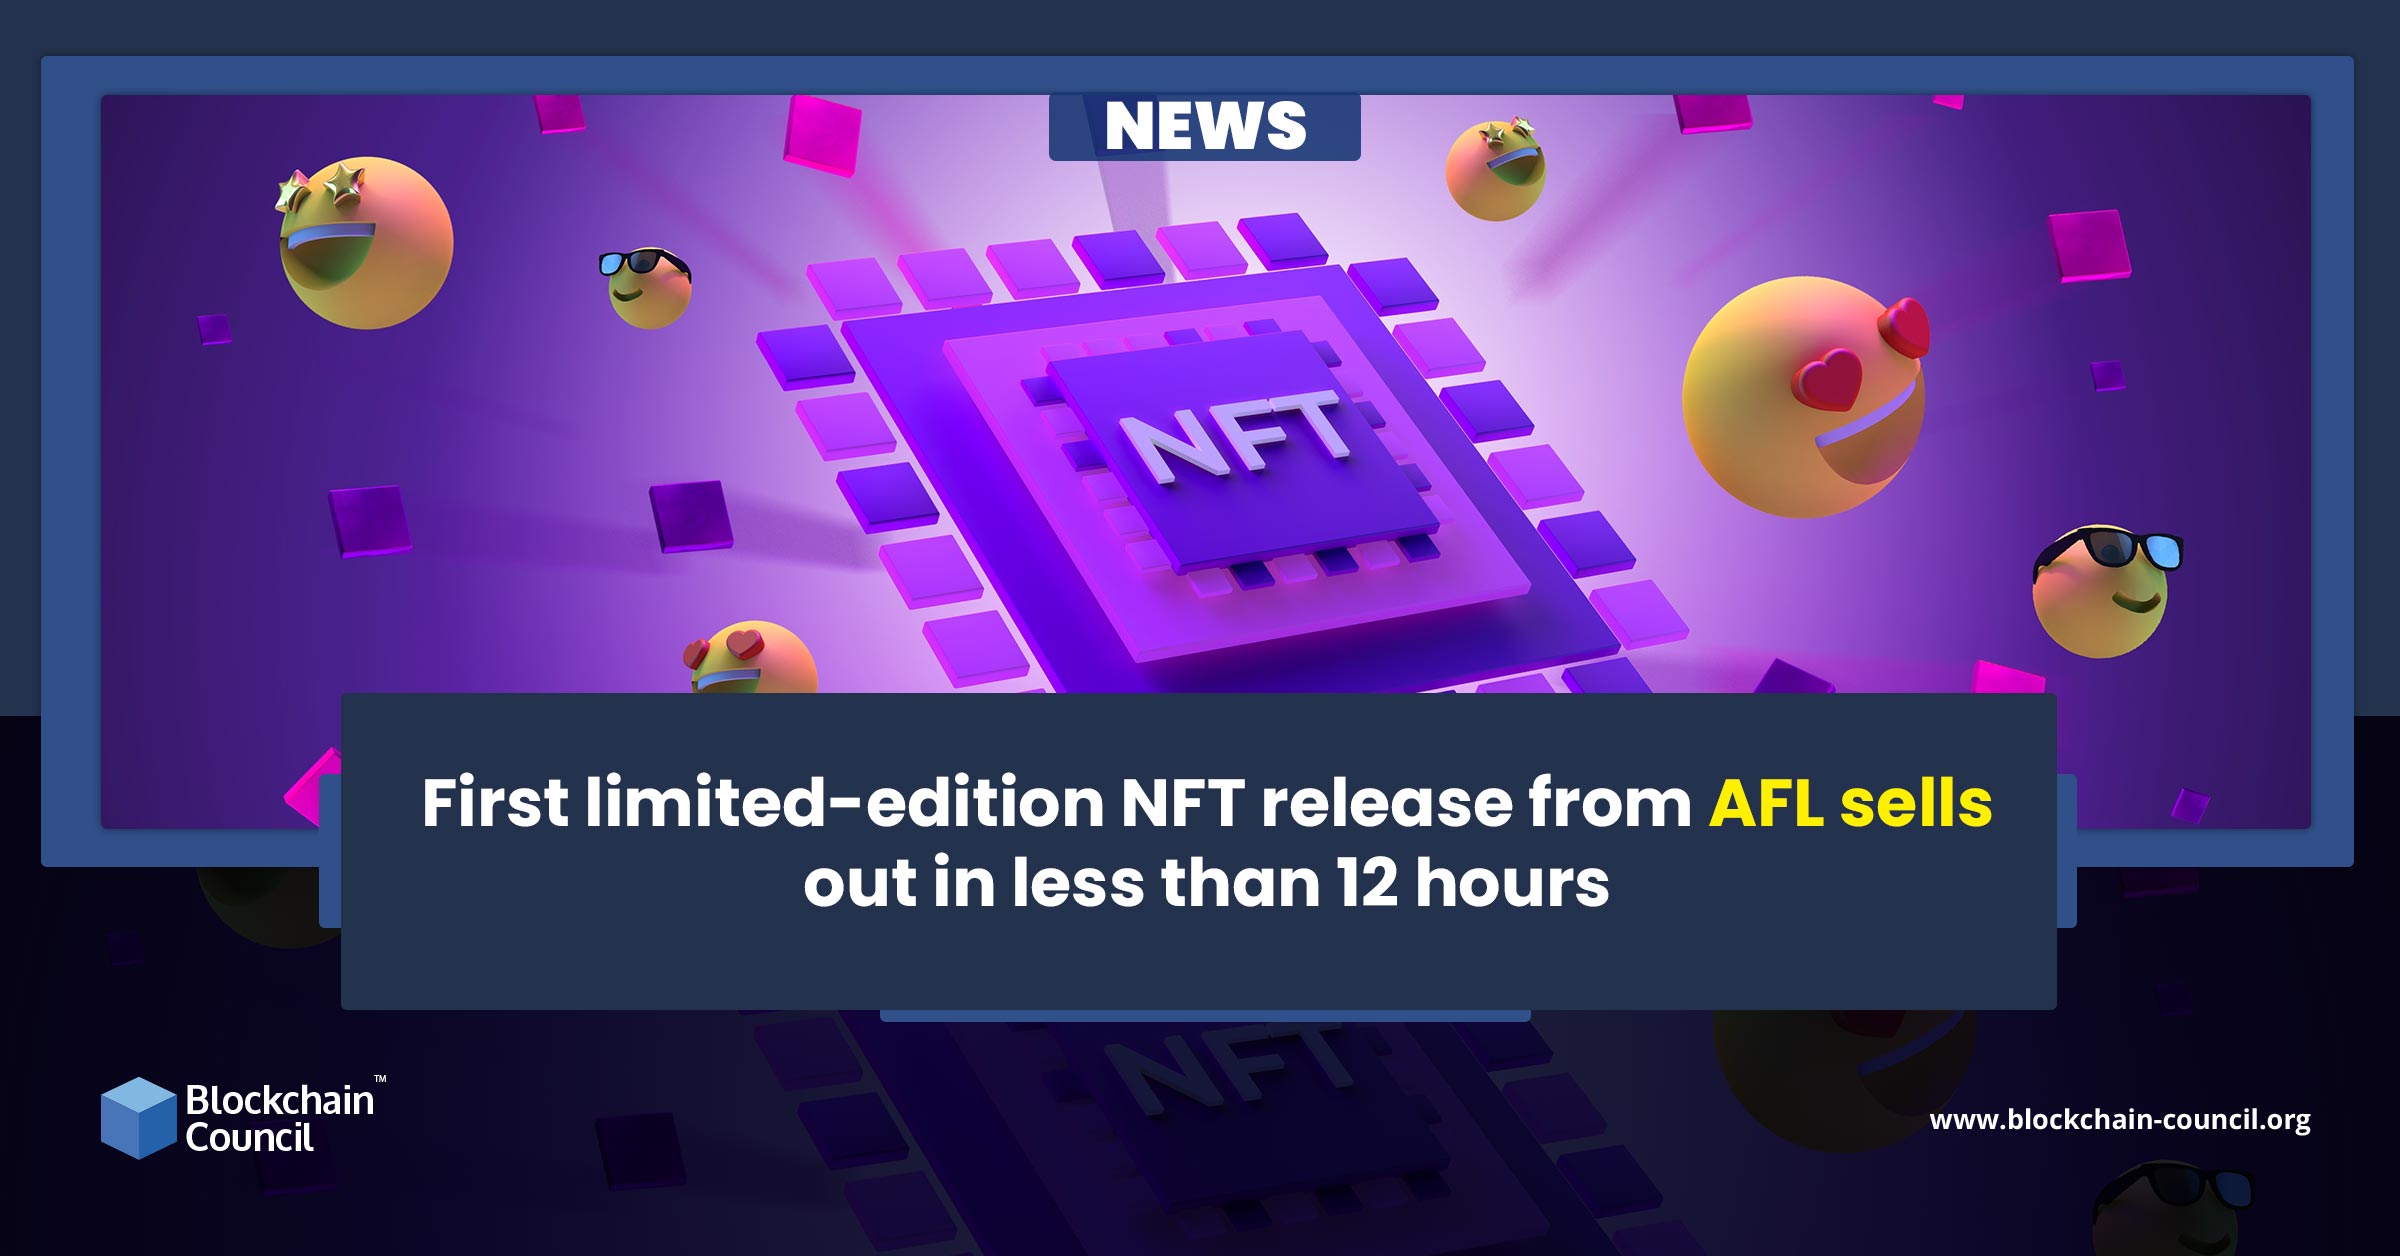 First limited-edition NFT release from AFL sells out in less than 12 hours